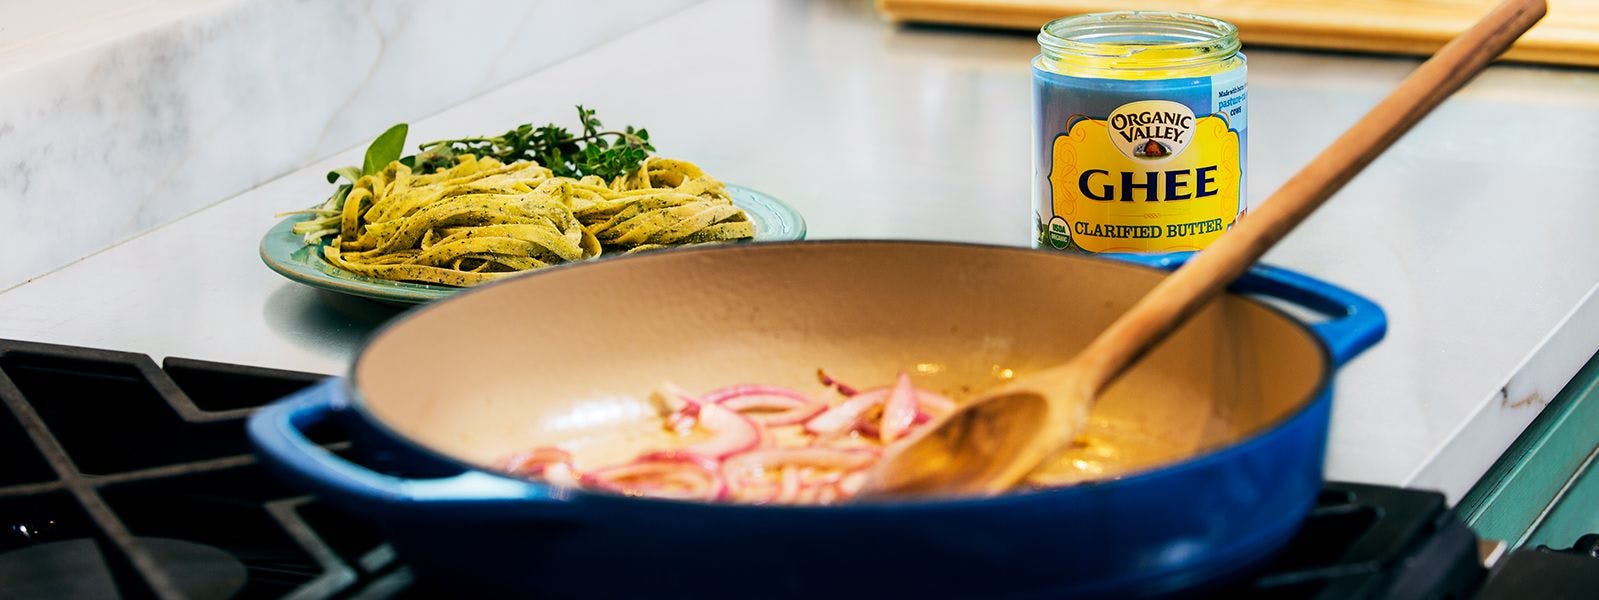 Cooking vegetables with Organic Valley Ghee